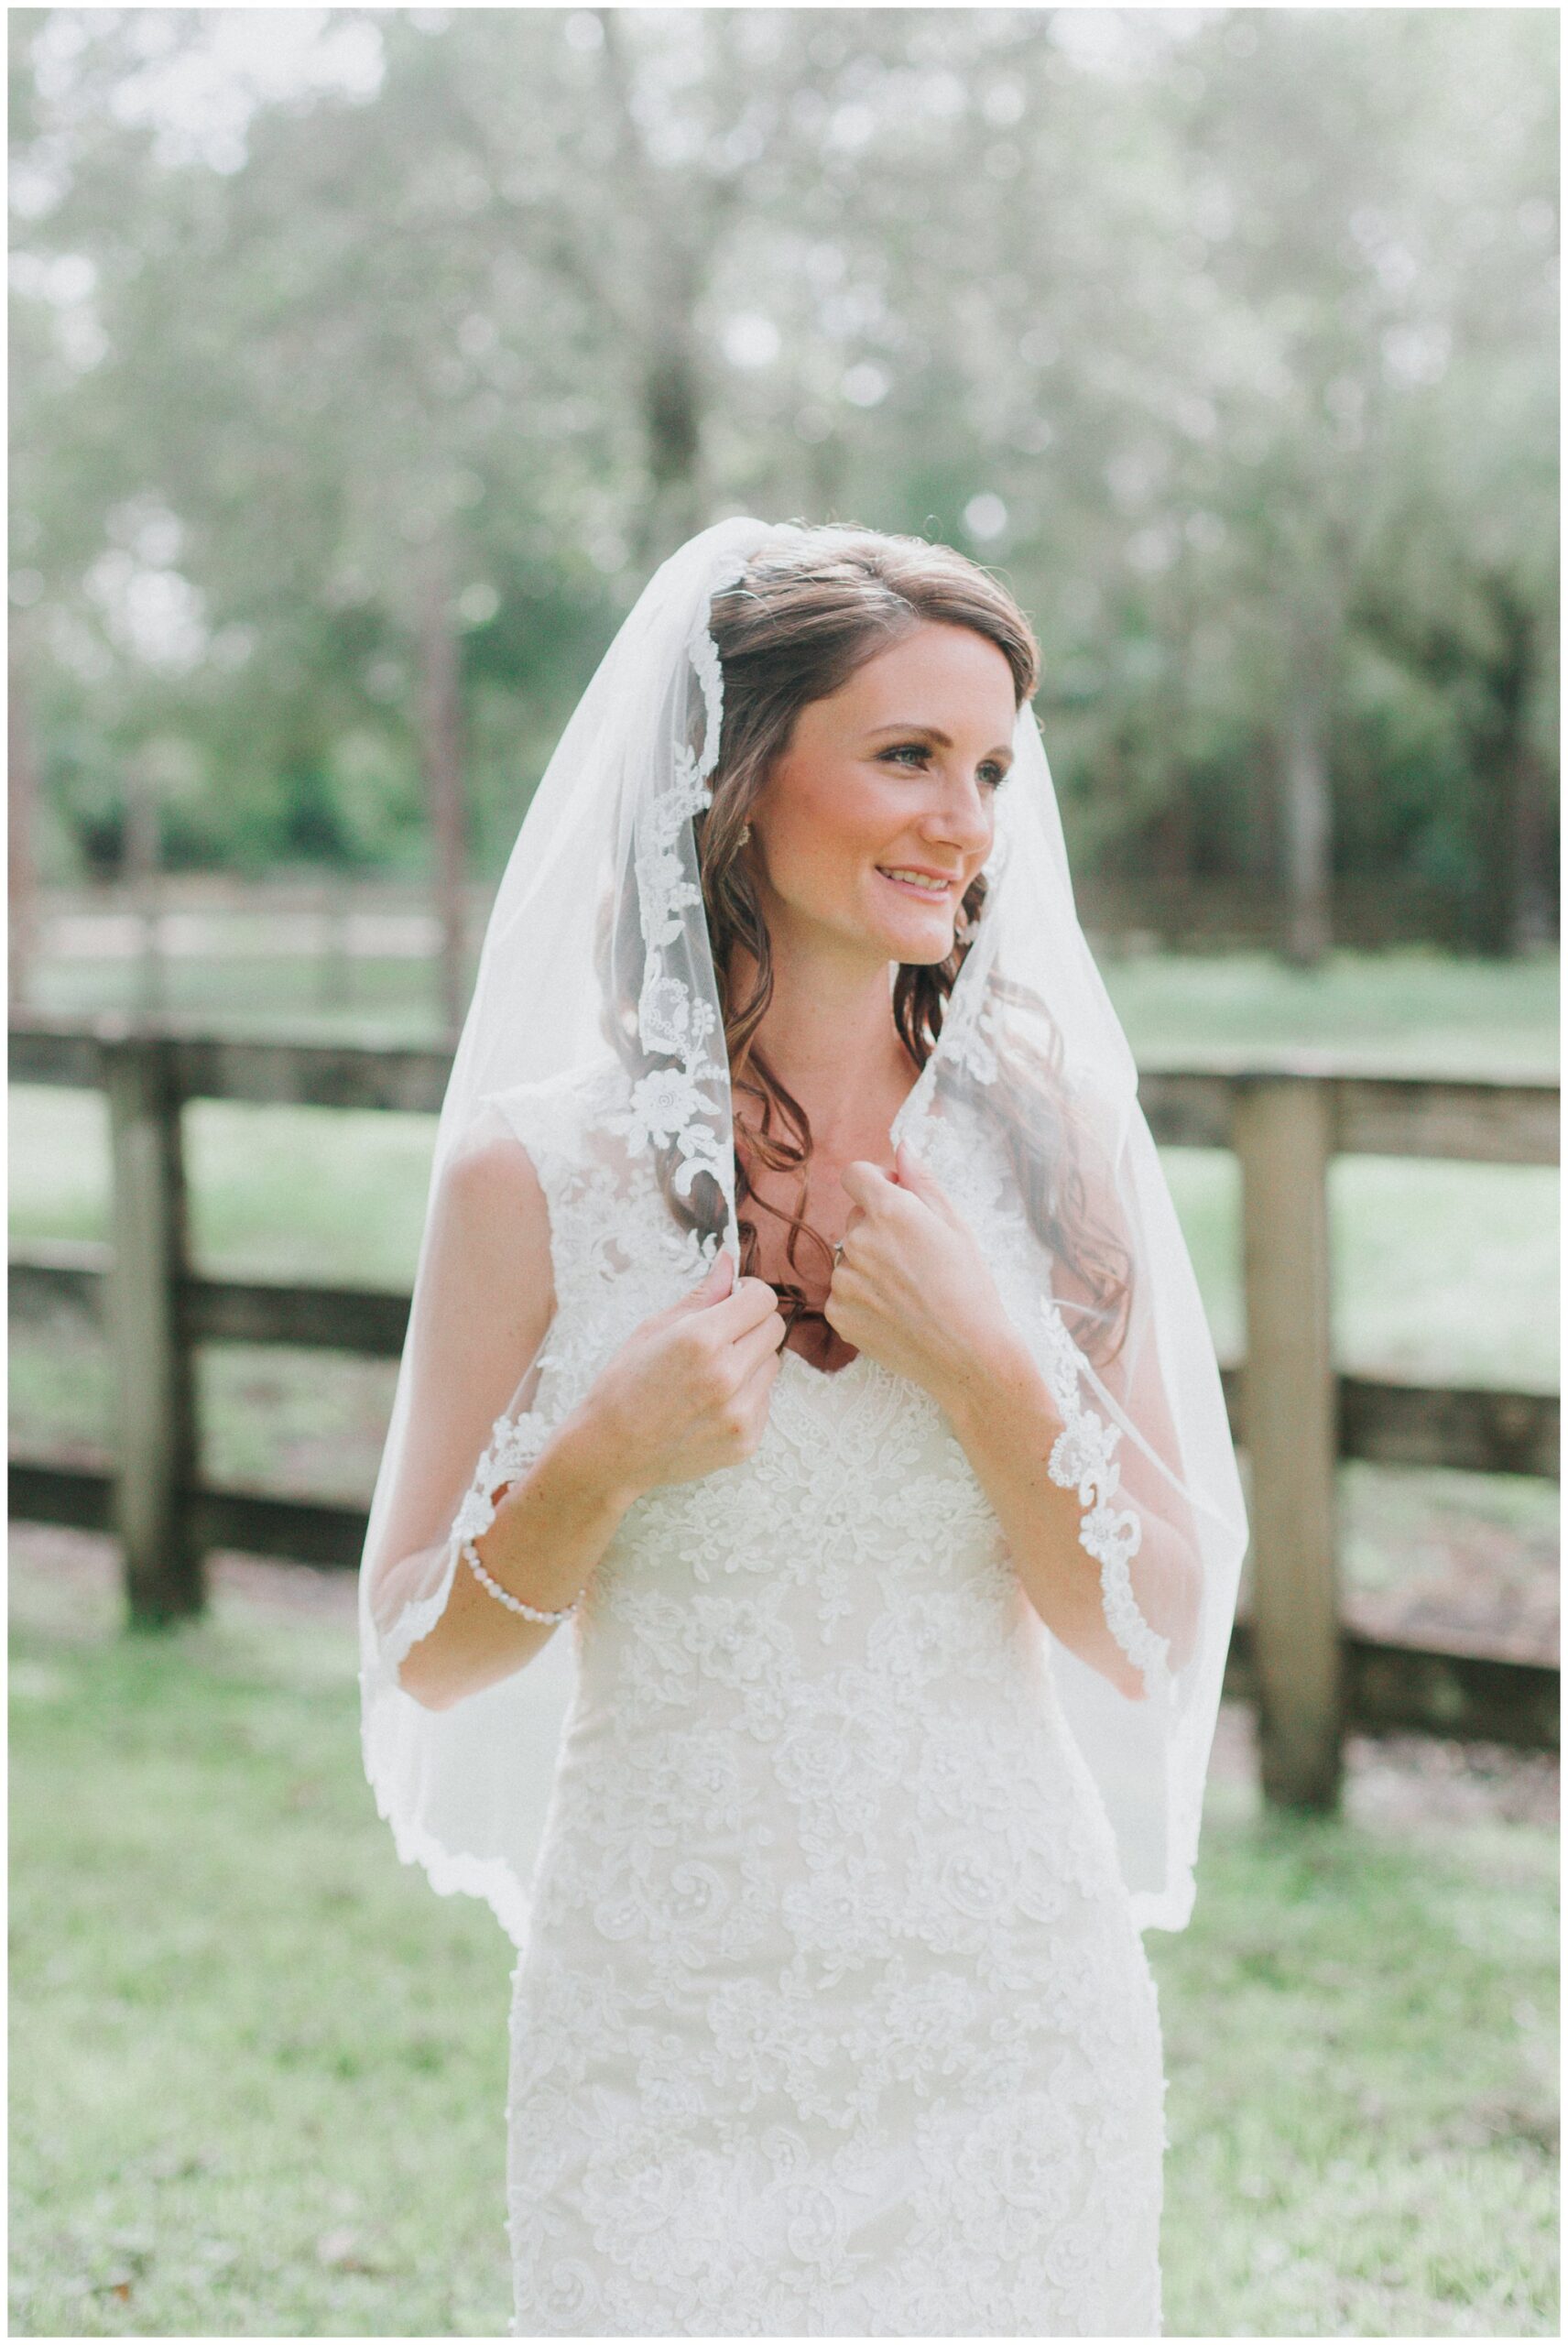 Check out the detail on her lace wedding dress! So beautiful!&nbsp;